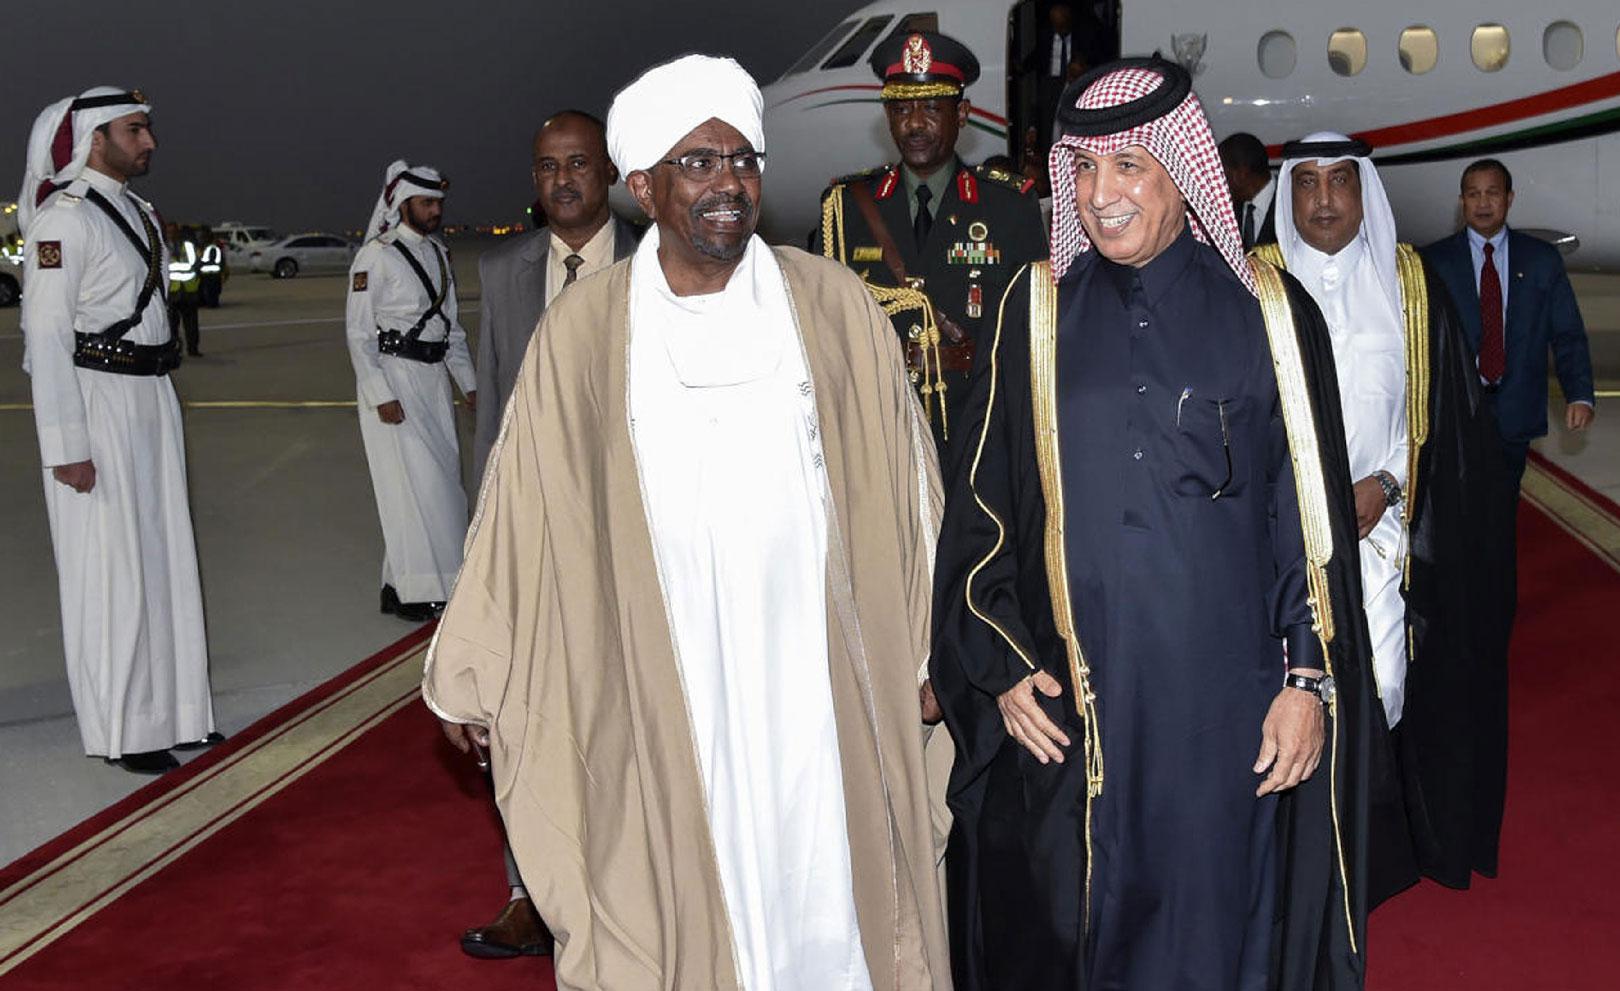 A handout picture released by the Qatar News Agency (QNA) on January 23, 2019 shows Sudanese President Omar al-Bashir (R) being received by Qatari Minister of State for Foreign Affairs Sultan bin Saad al-Muraikhi in Doha.